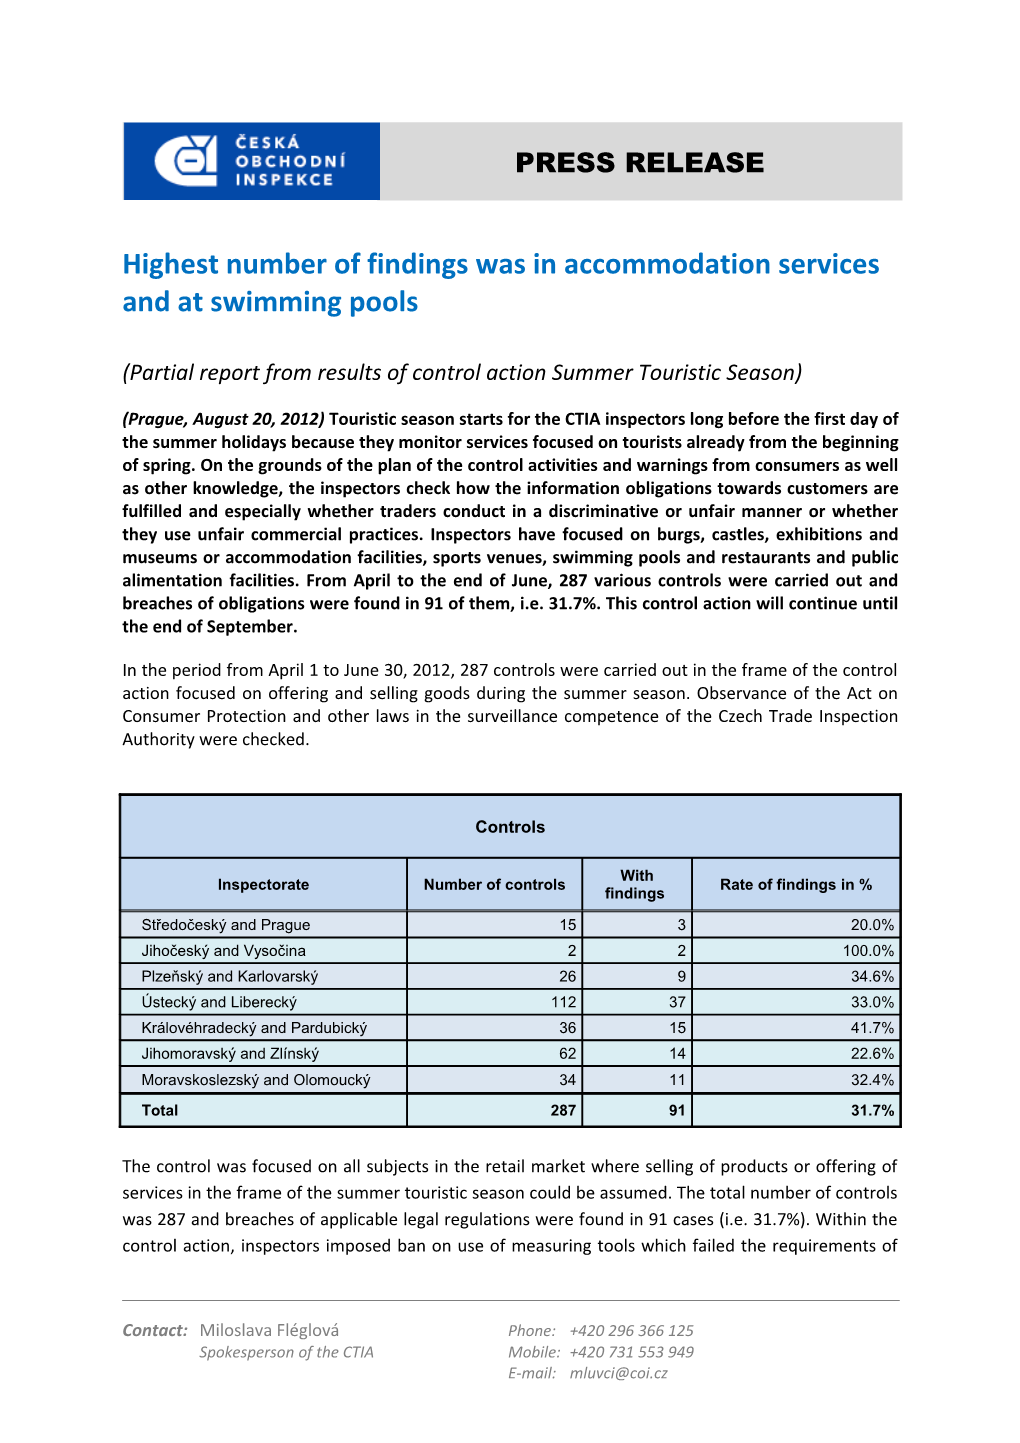 Highest Number of Findings Was in Accommodation Services and at Swimming Pools